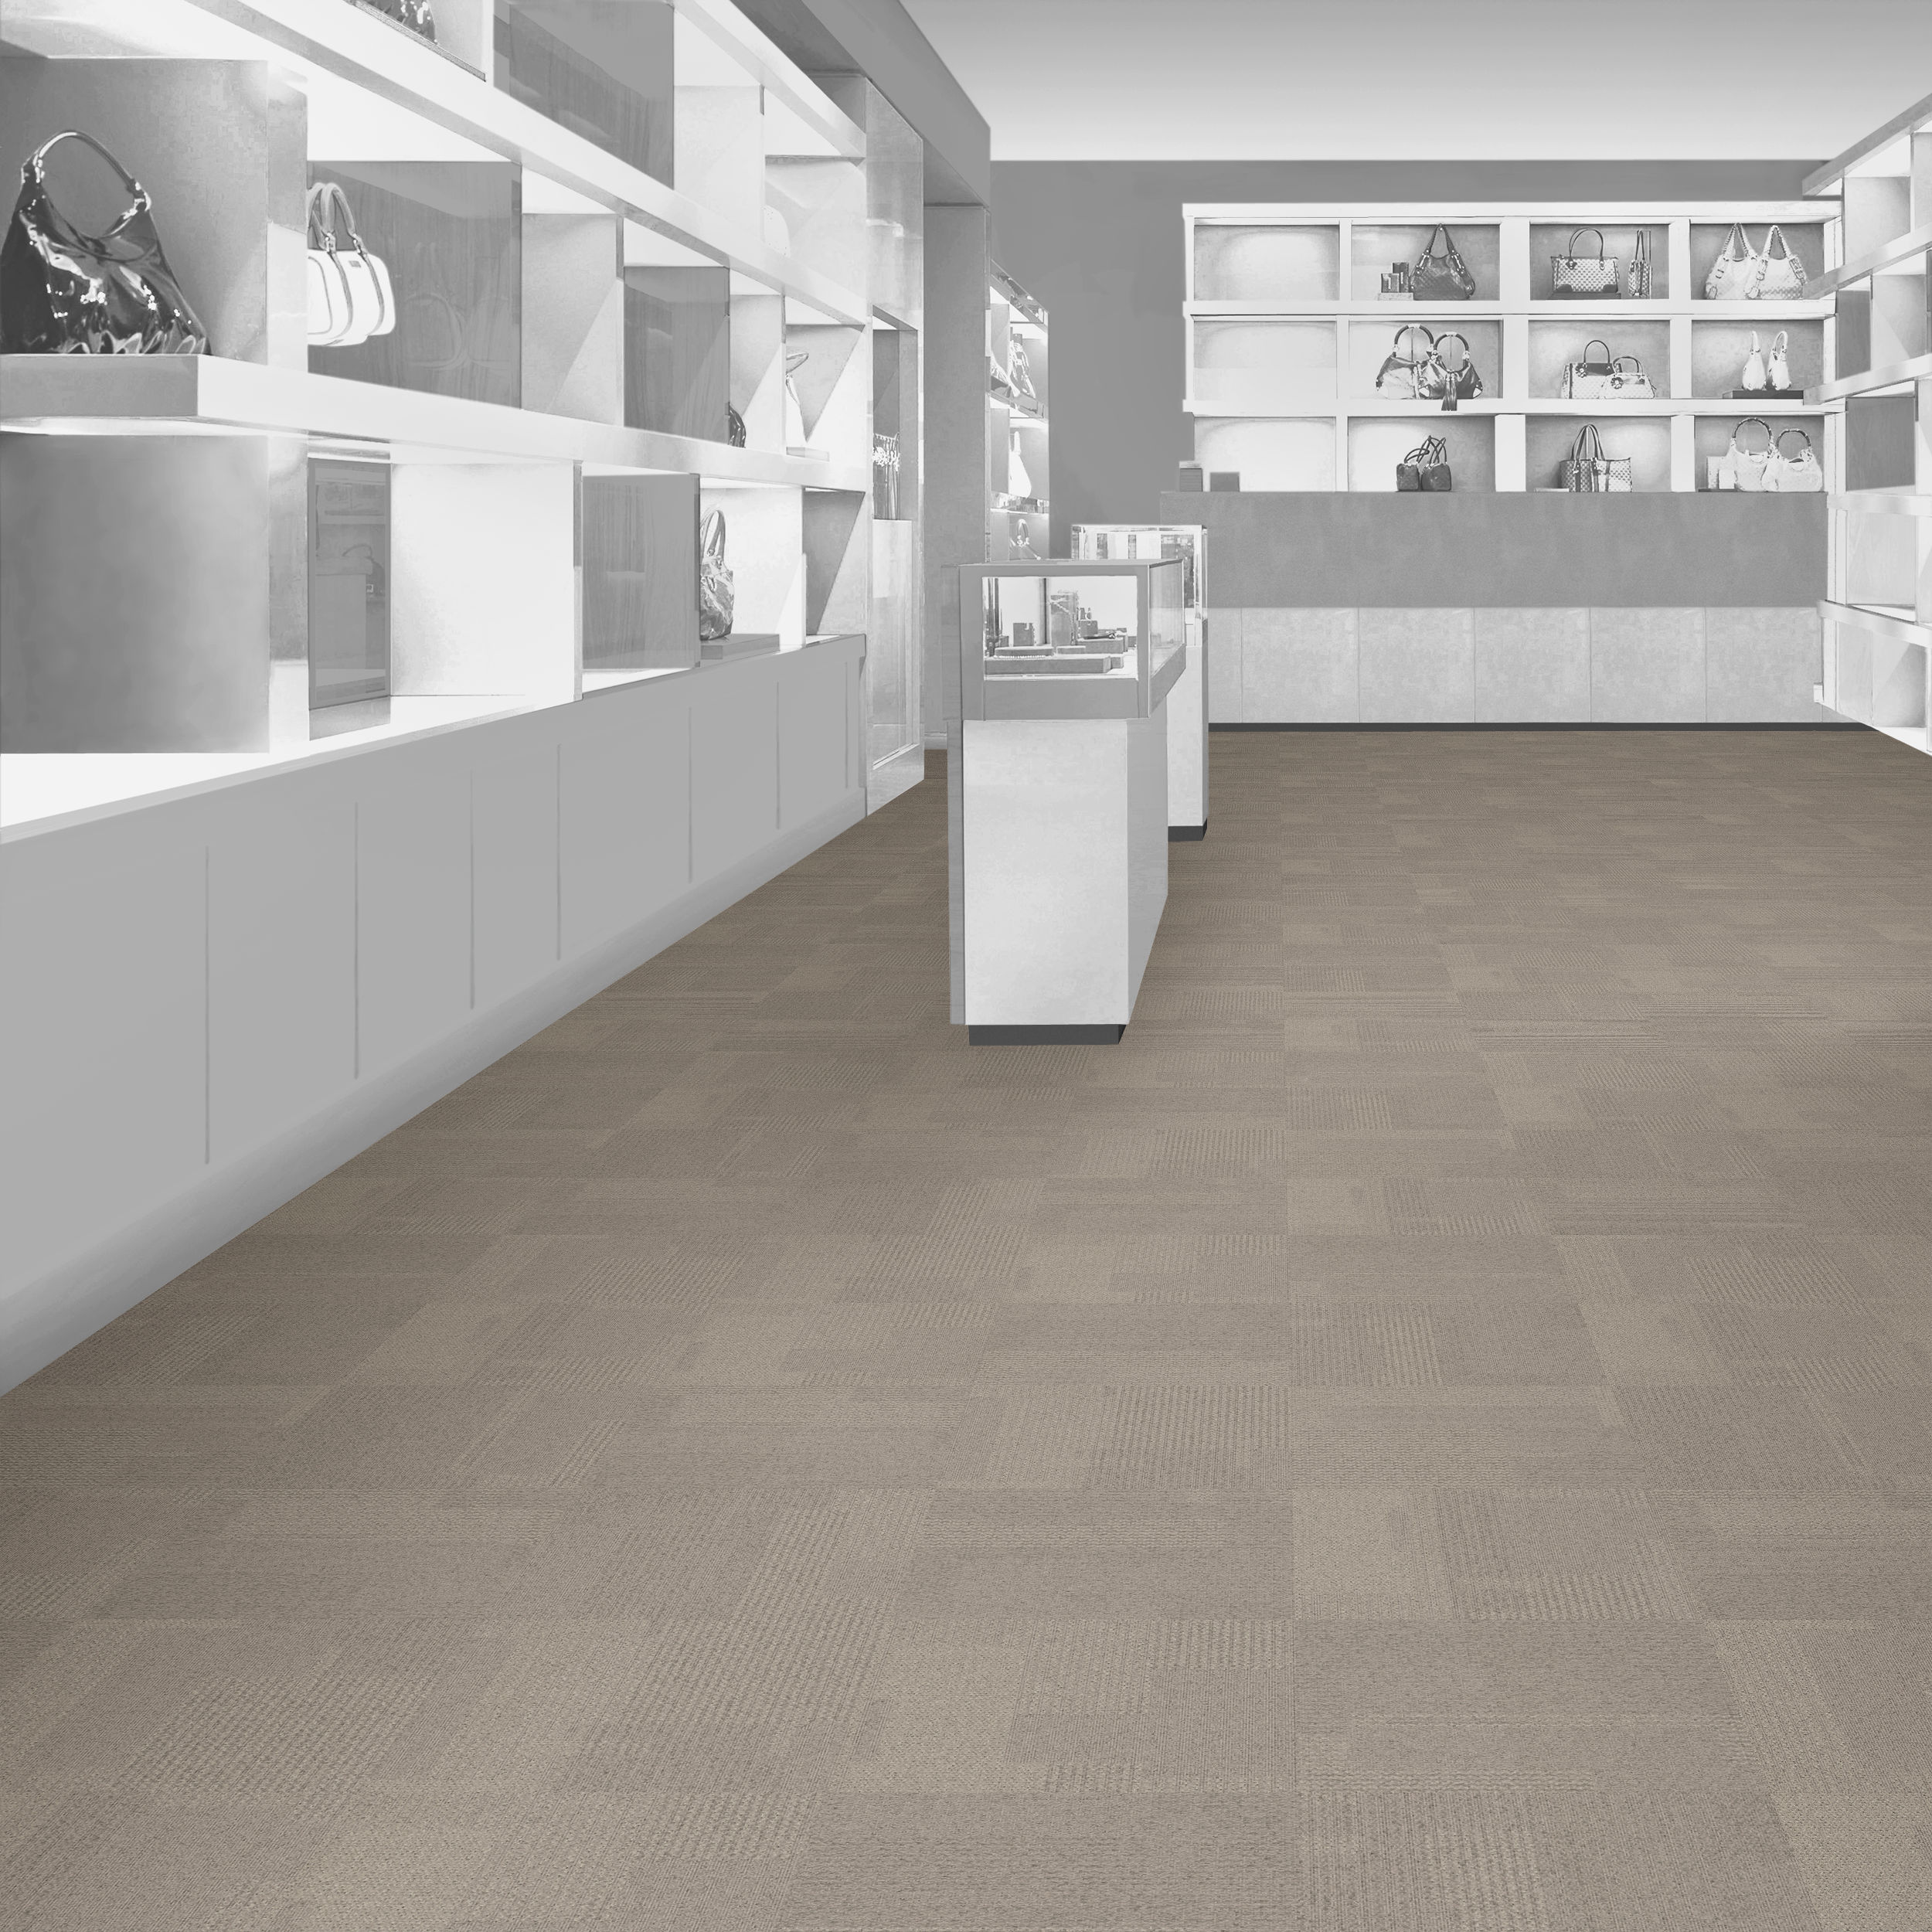 Manilla Transformation Carpet Tile in commercial store.